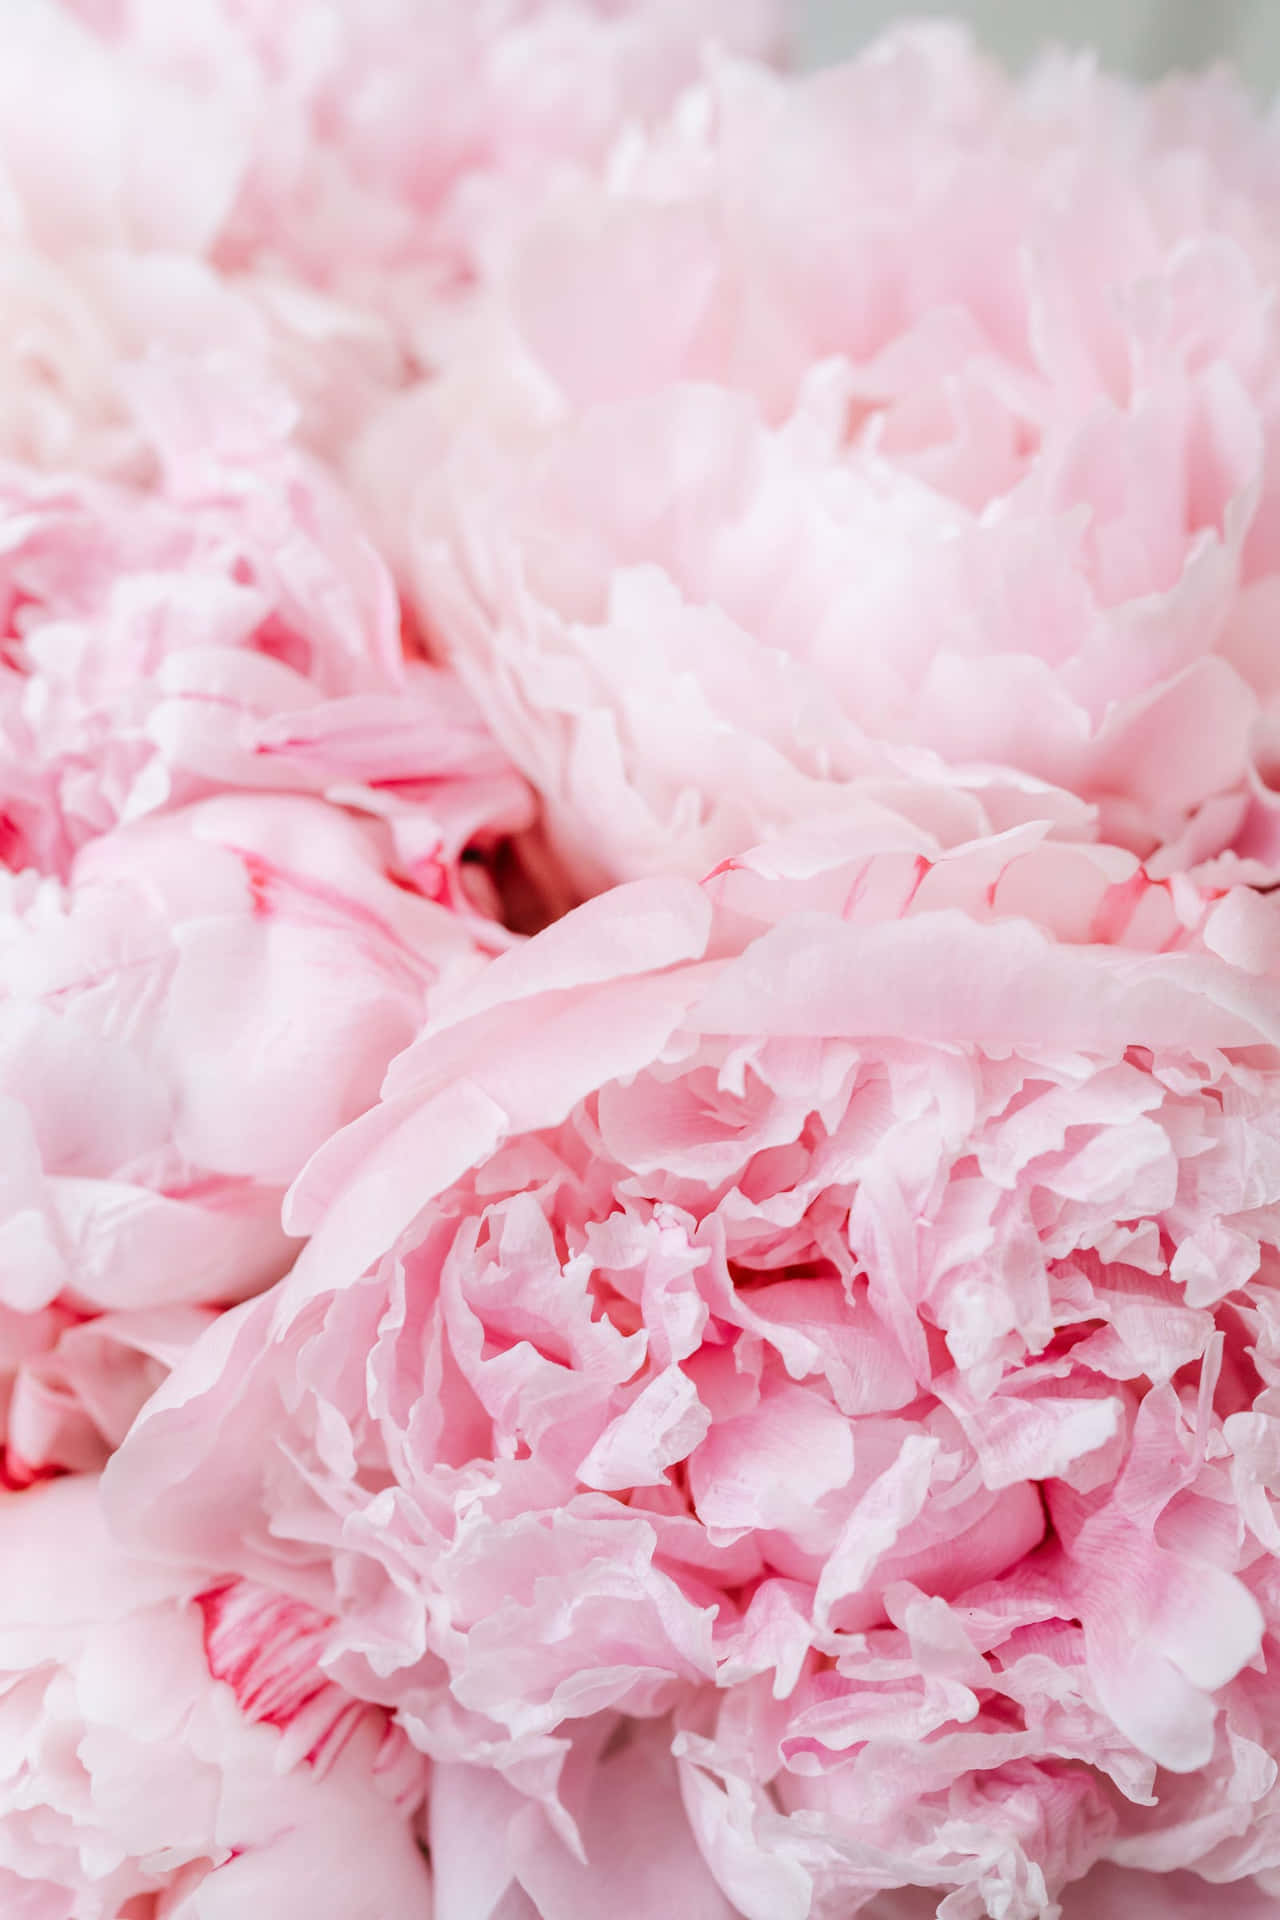 Pale Pink Background Flowers Petals